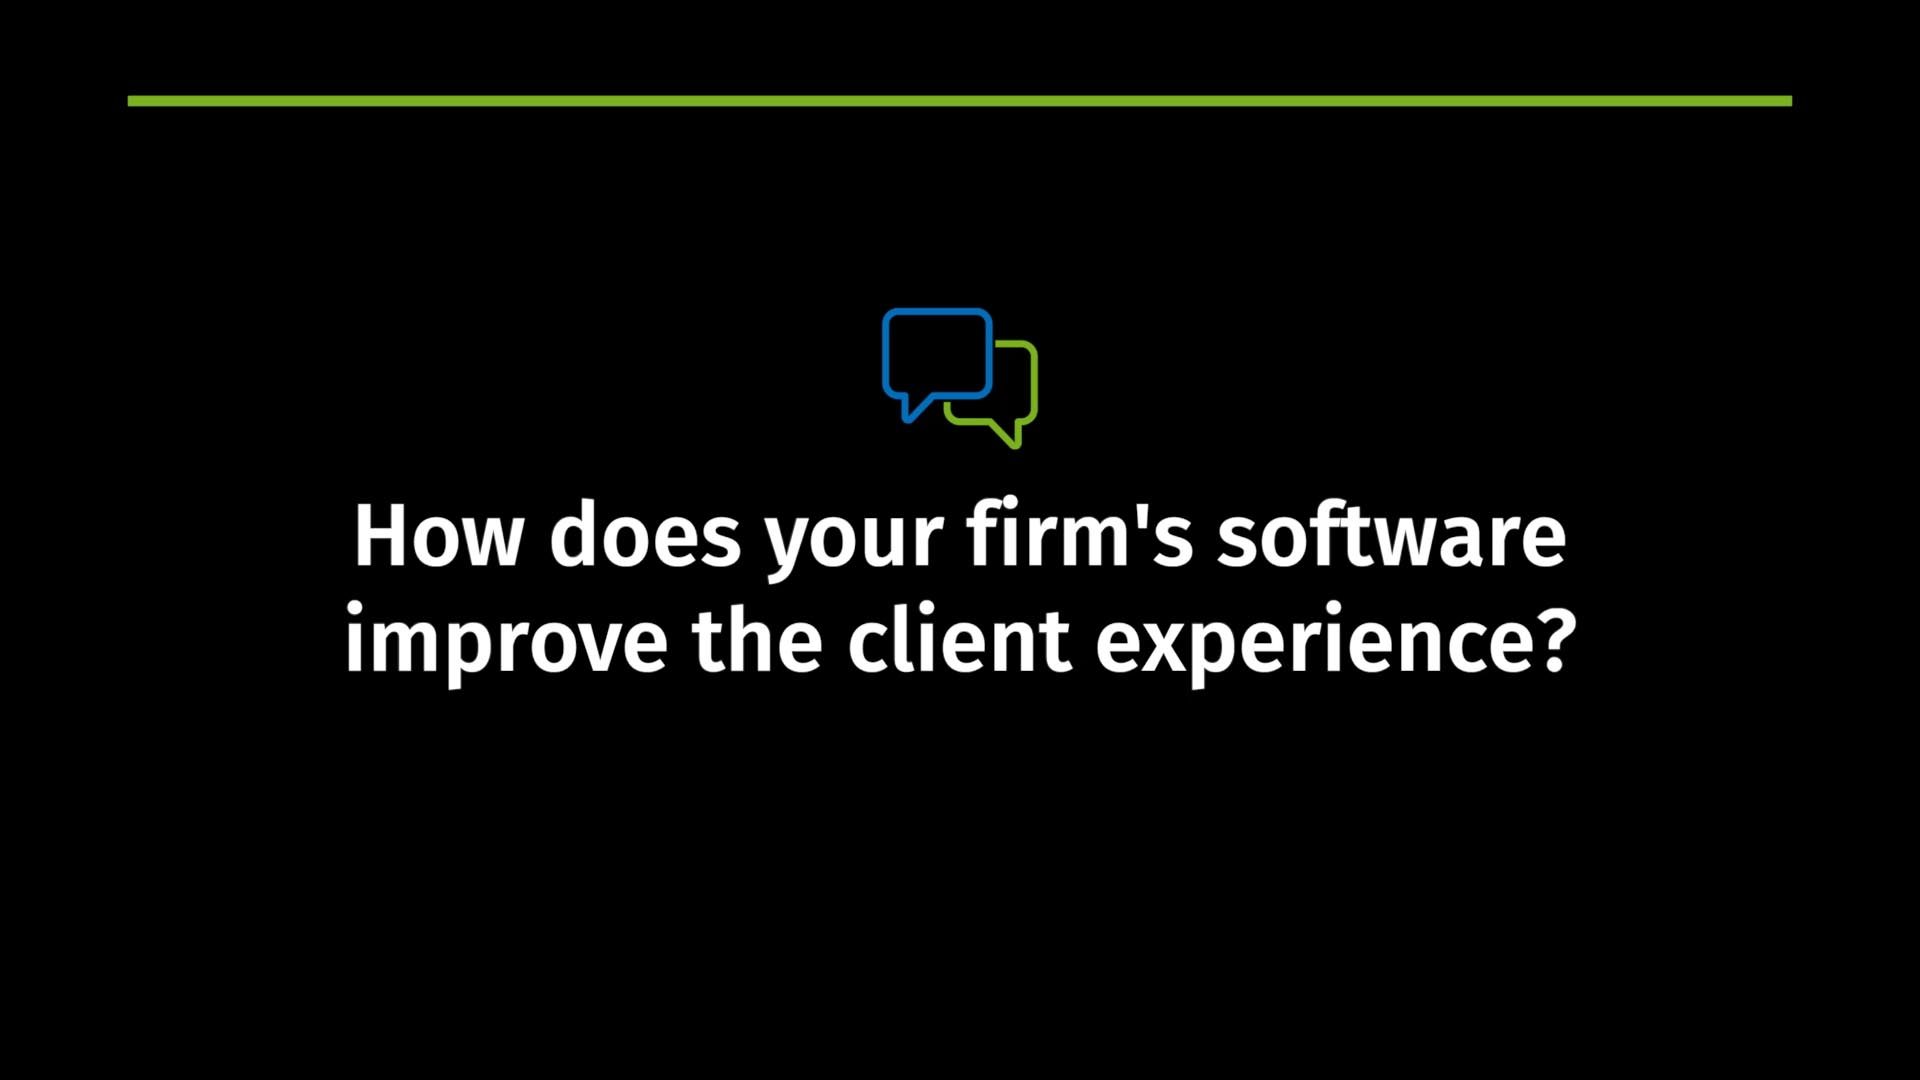 How does your firm's software improve the client experience?